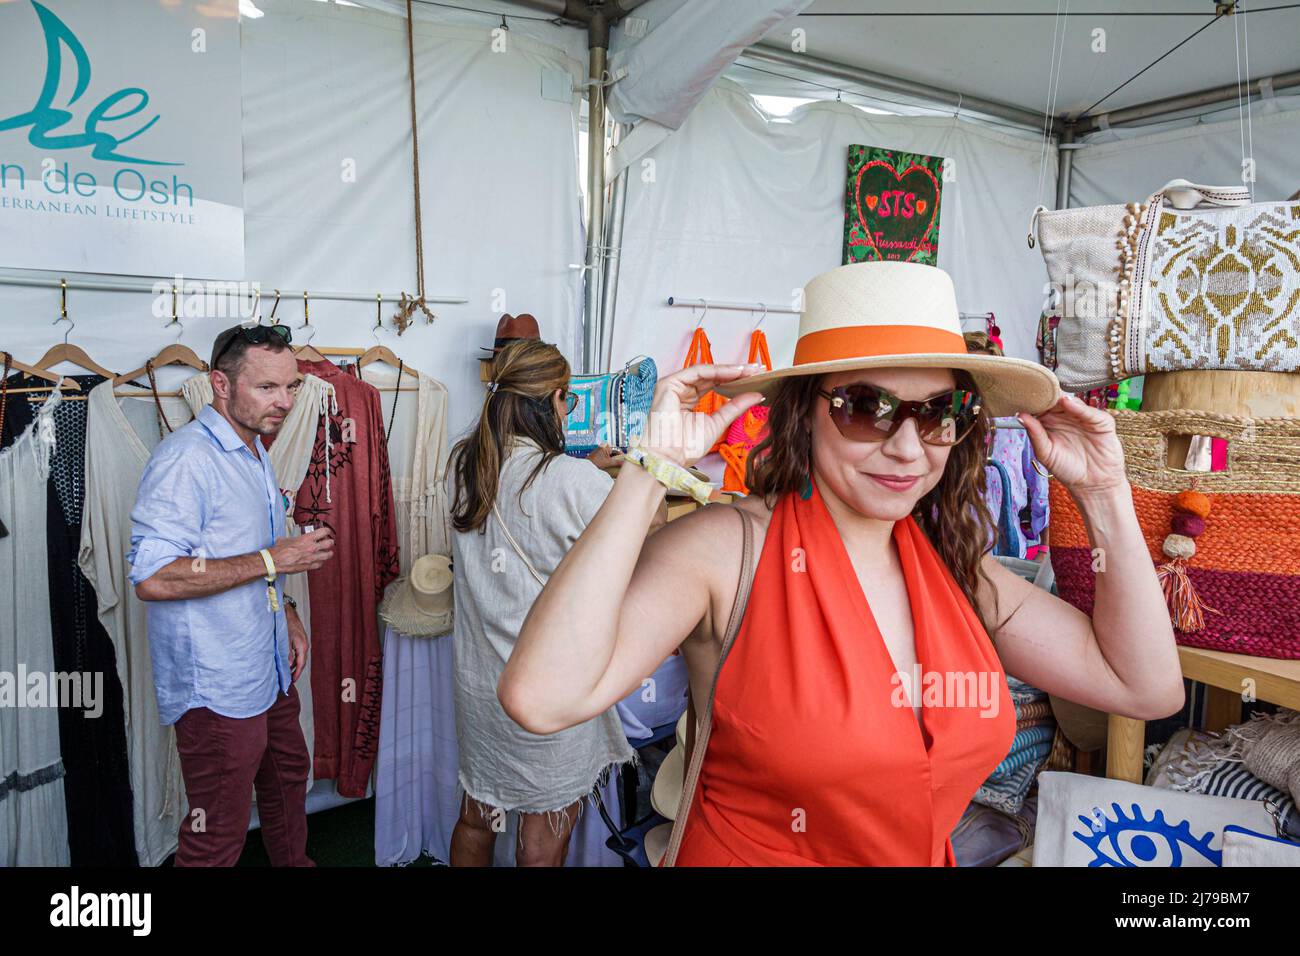 Miami Beach Florida Beach Polo World Cup Miami annual event Retail Village shopping vendors tents clothing display sale fashionable woman wearing hat Stock Photo